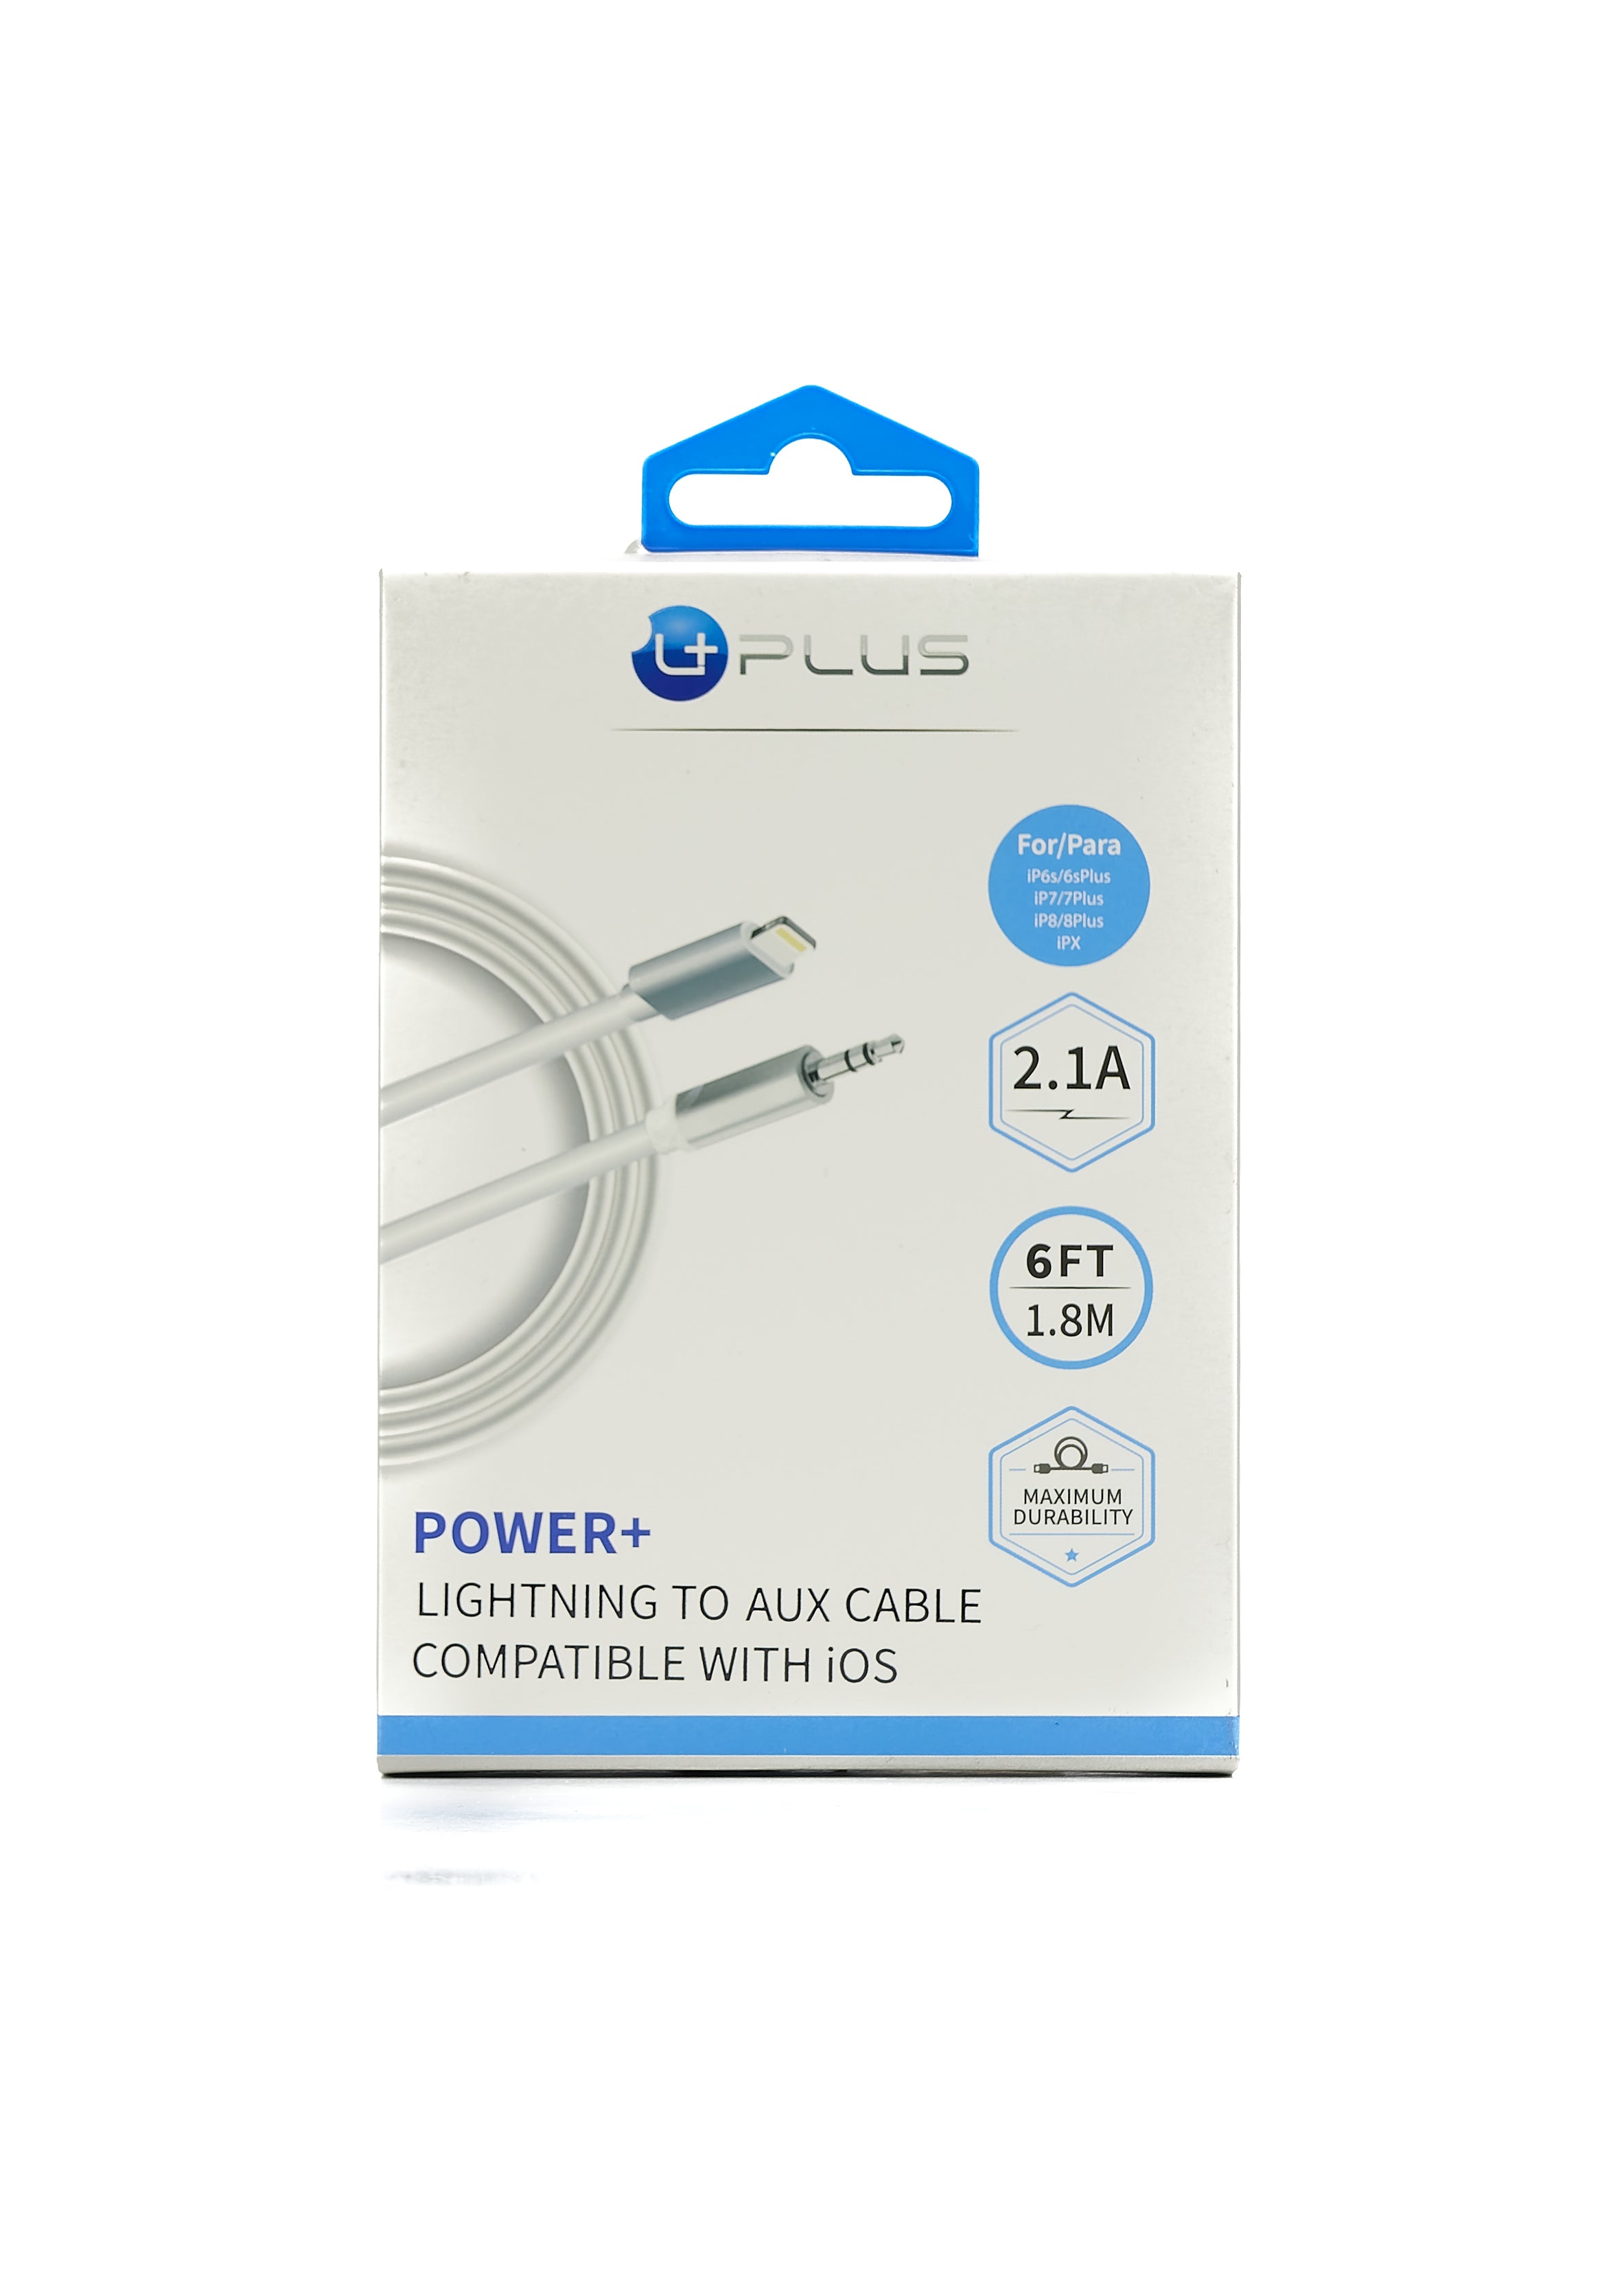 U PLUS Power+ Lightning to Aux Cable